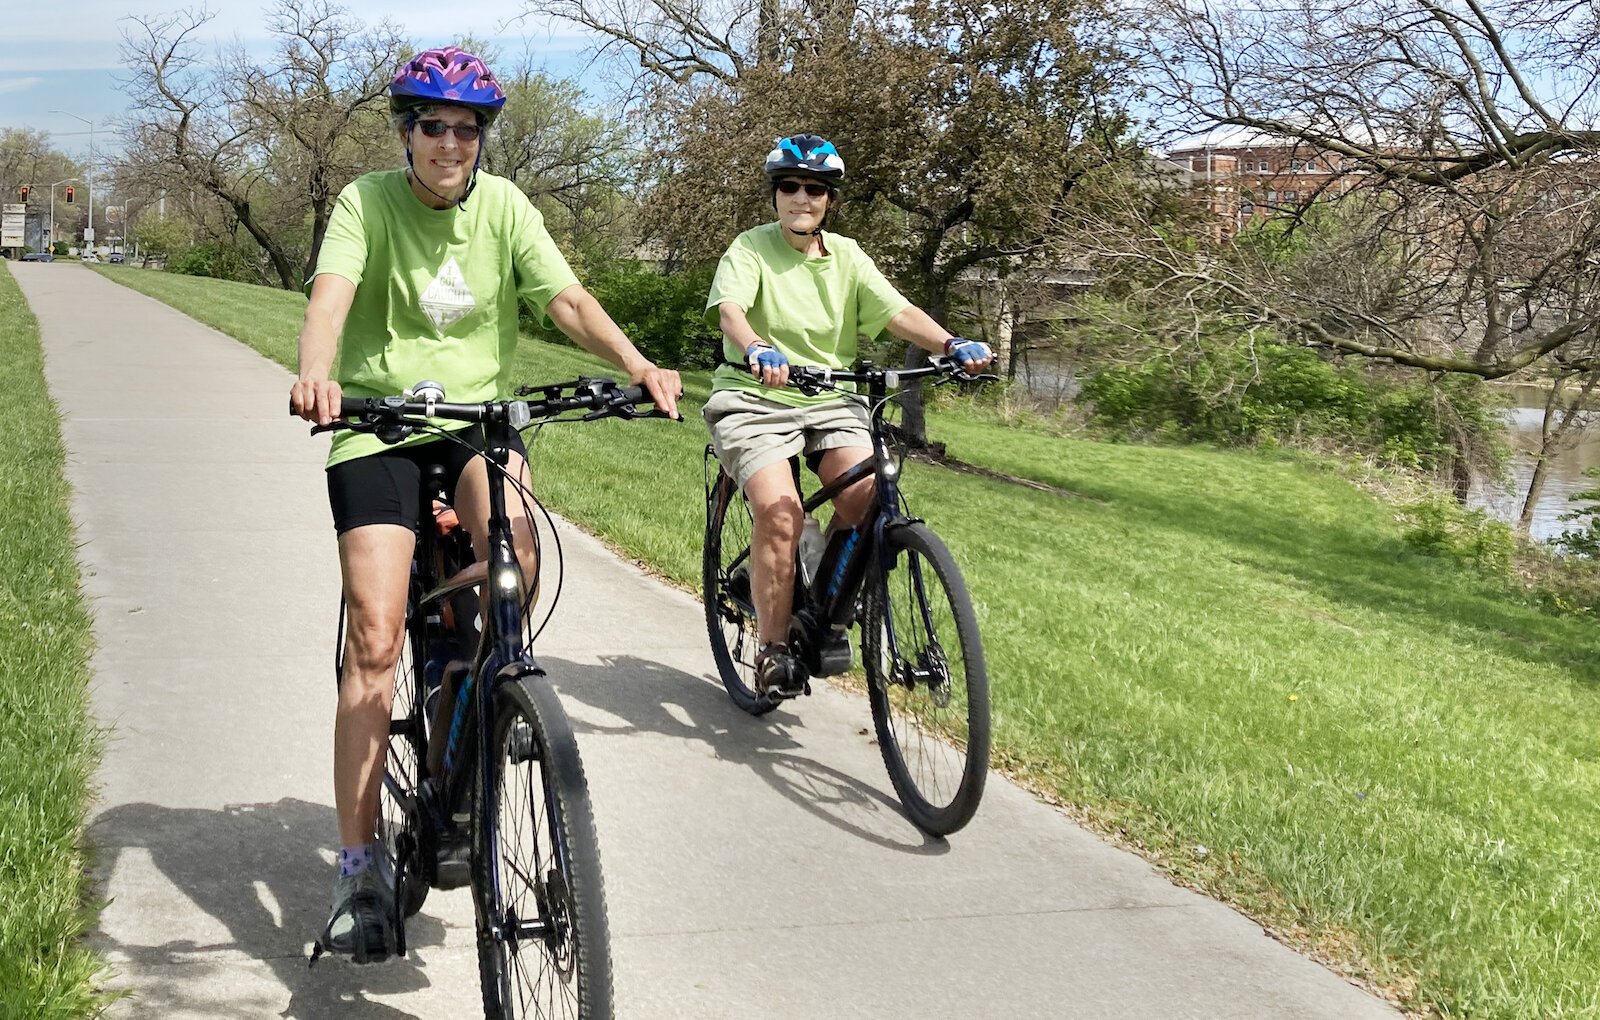 Cathie Rowand and Kathi Weiss of Fort Wayne are embarking on a 16-day journey to Washington D.C. by bike with a goal to raise $20,000 for Fort Wayne Trails.